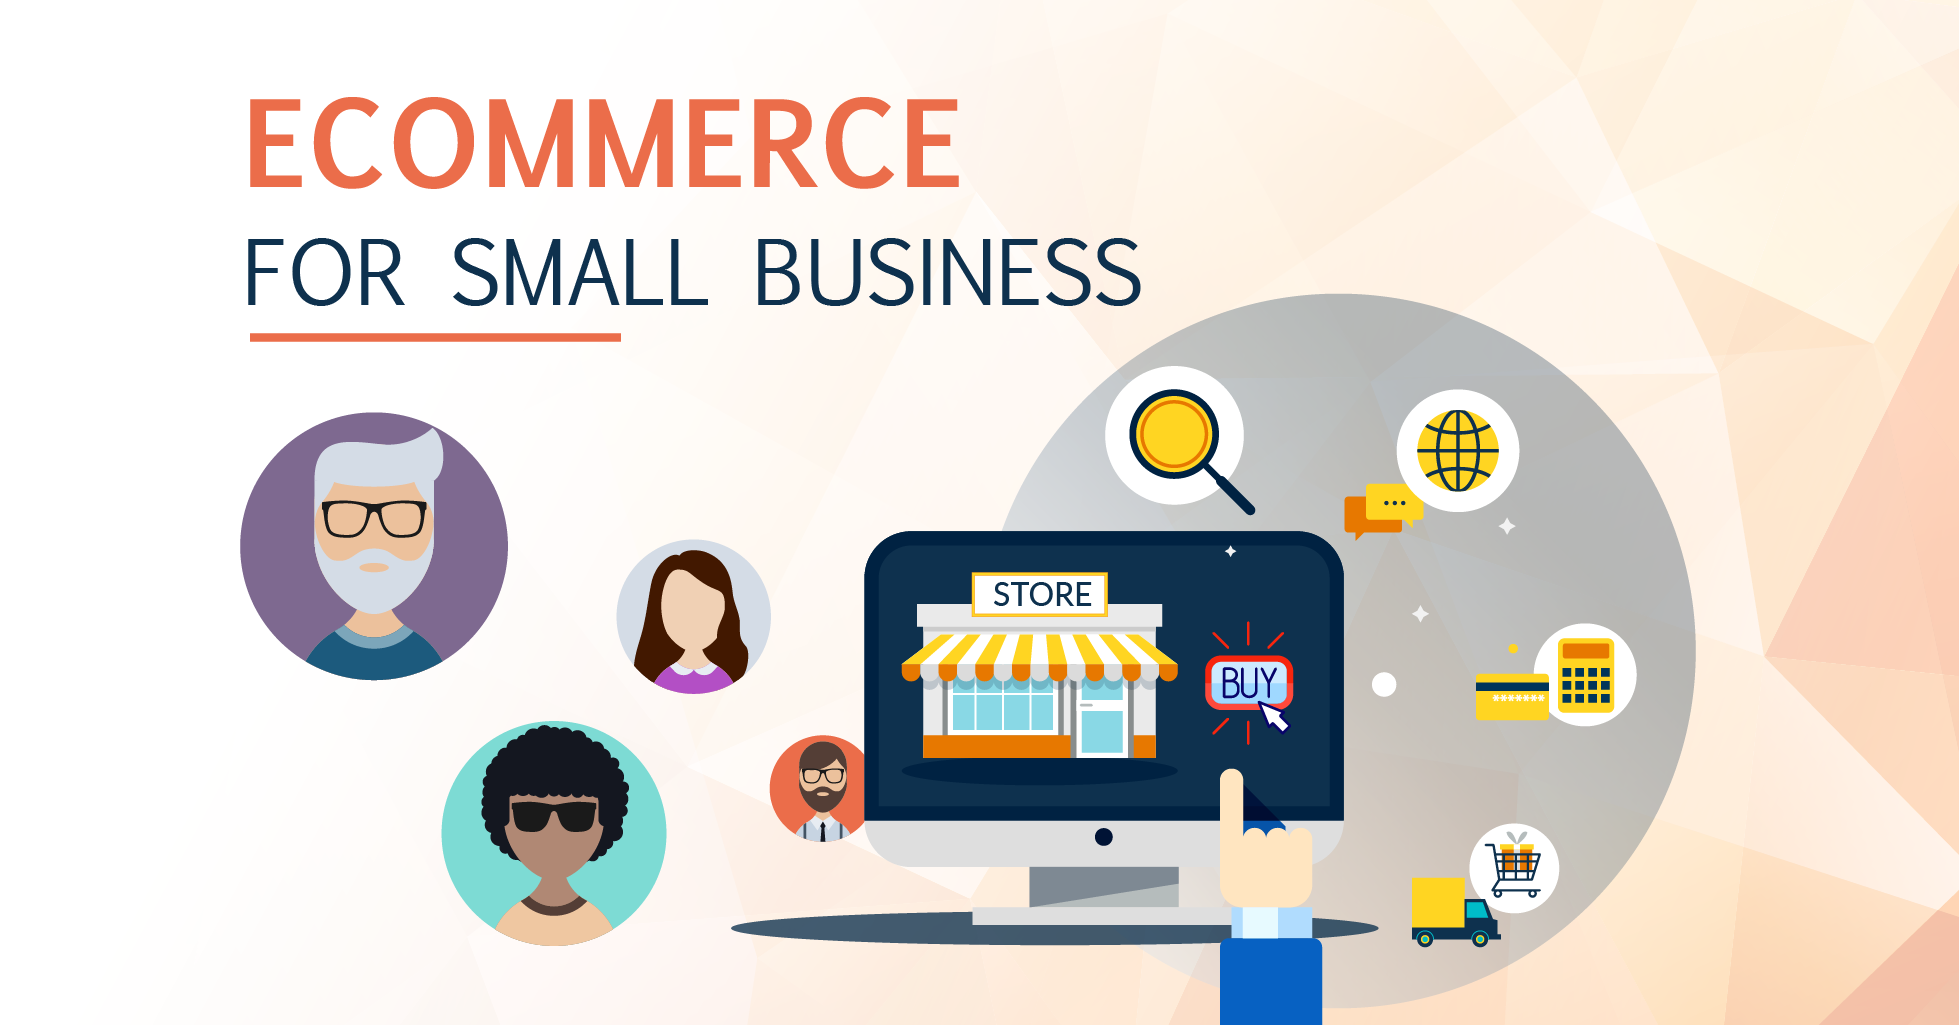 Make Your Small Business Go Online With ECommerce